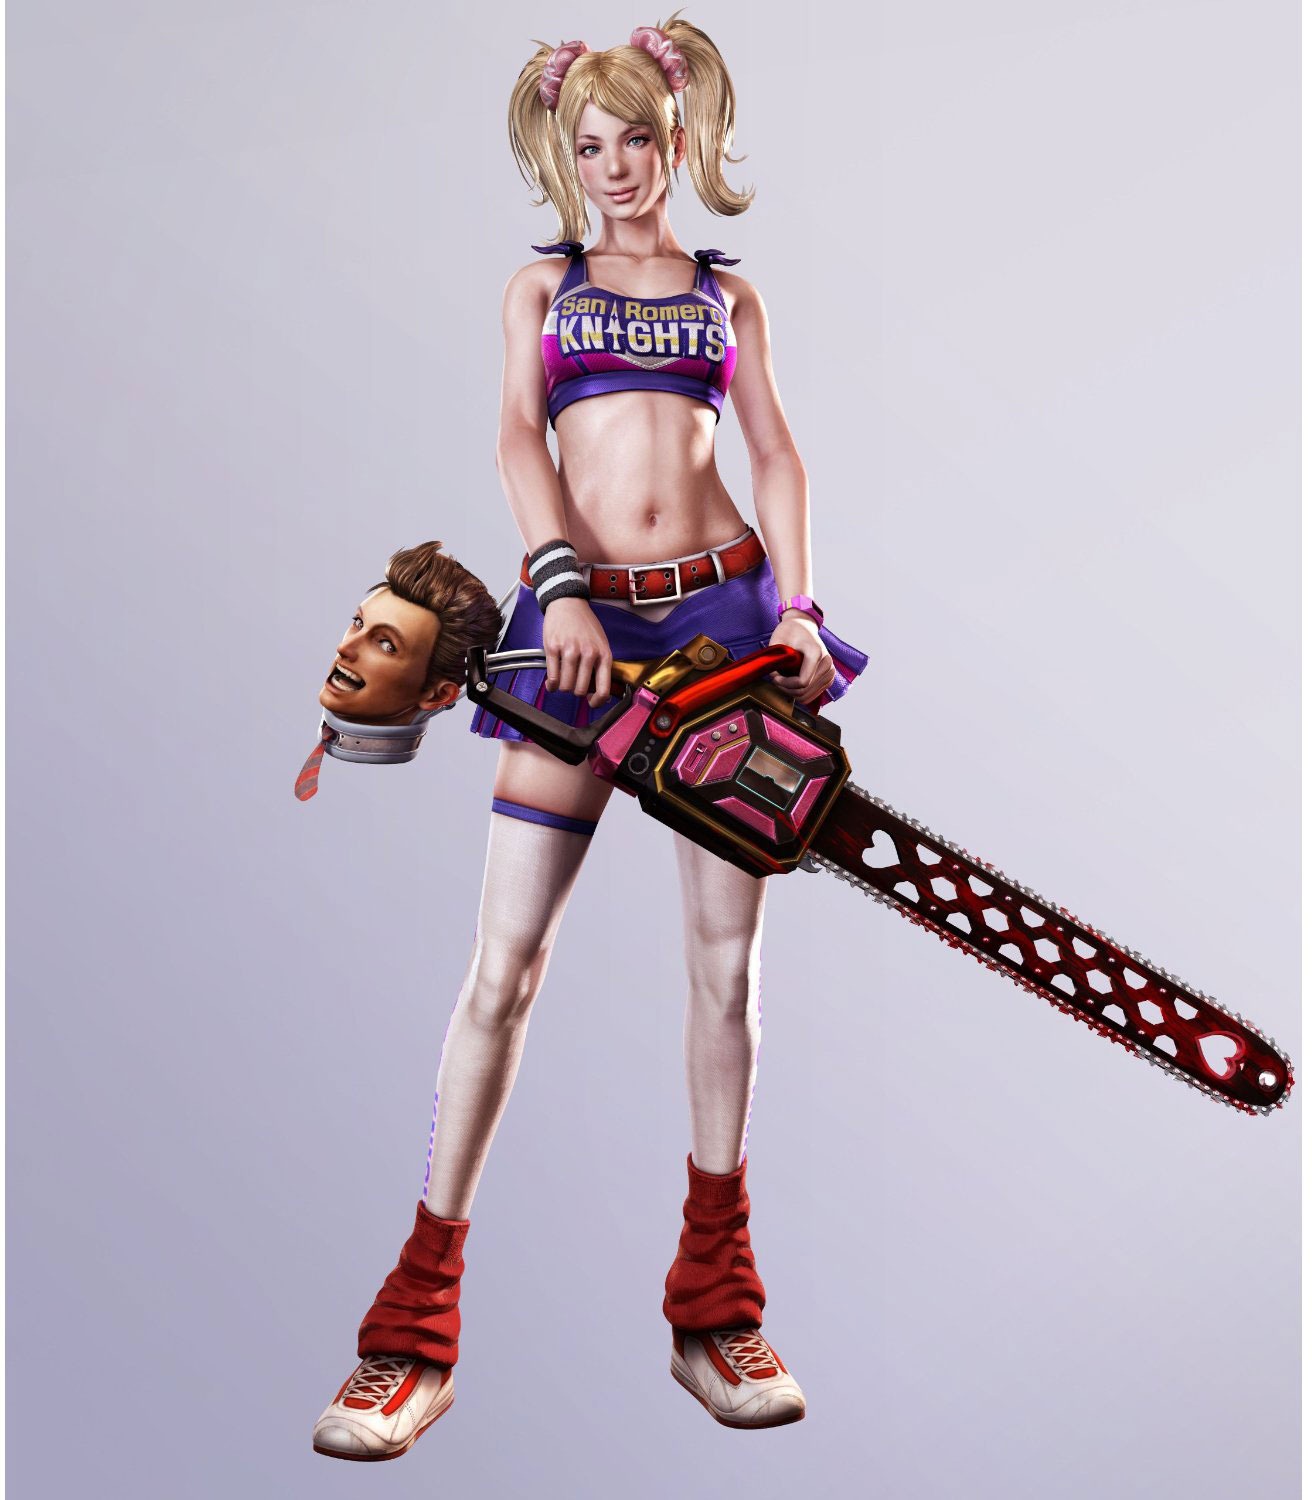 Lollipop Chainsaw RePOP Will Feature An Uncensored Costume : r/PS4